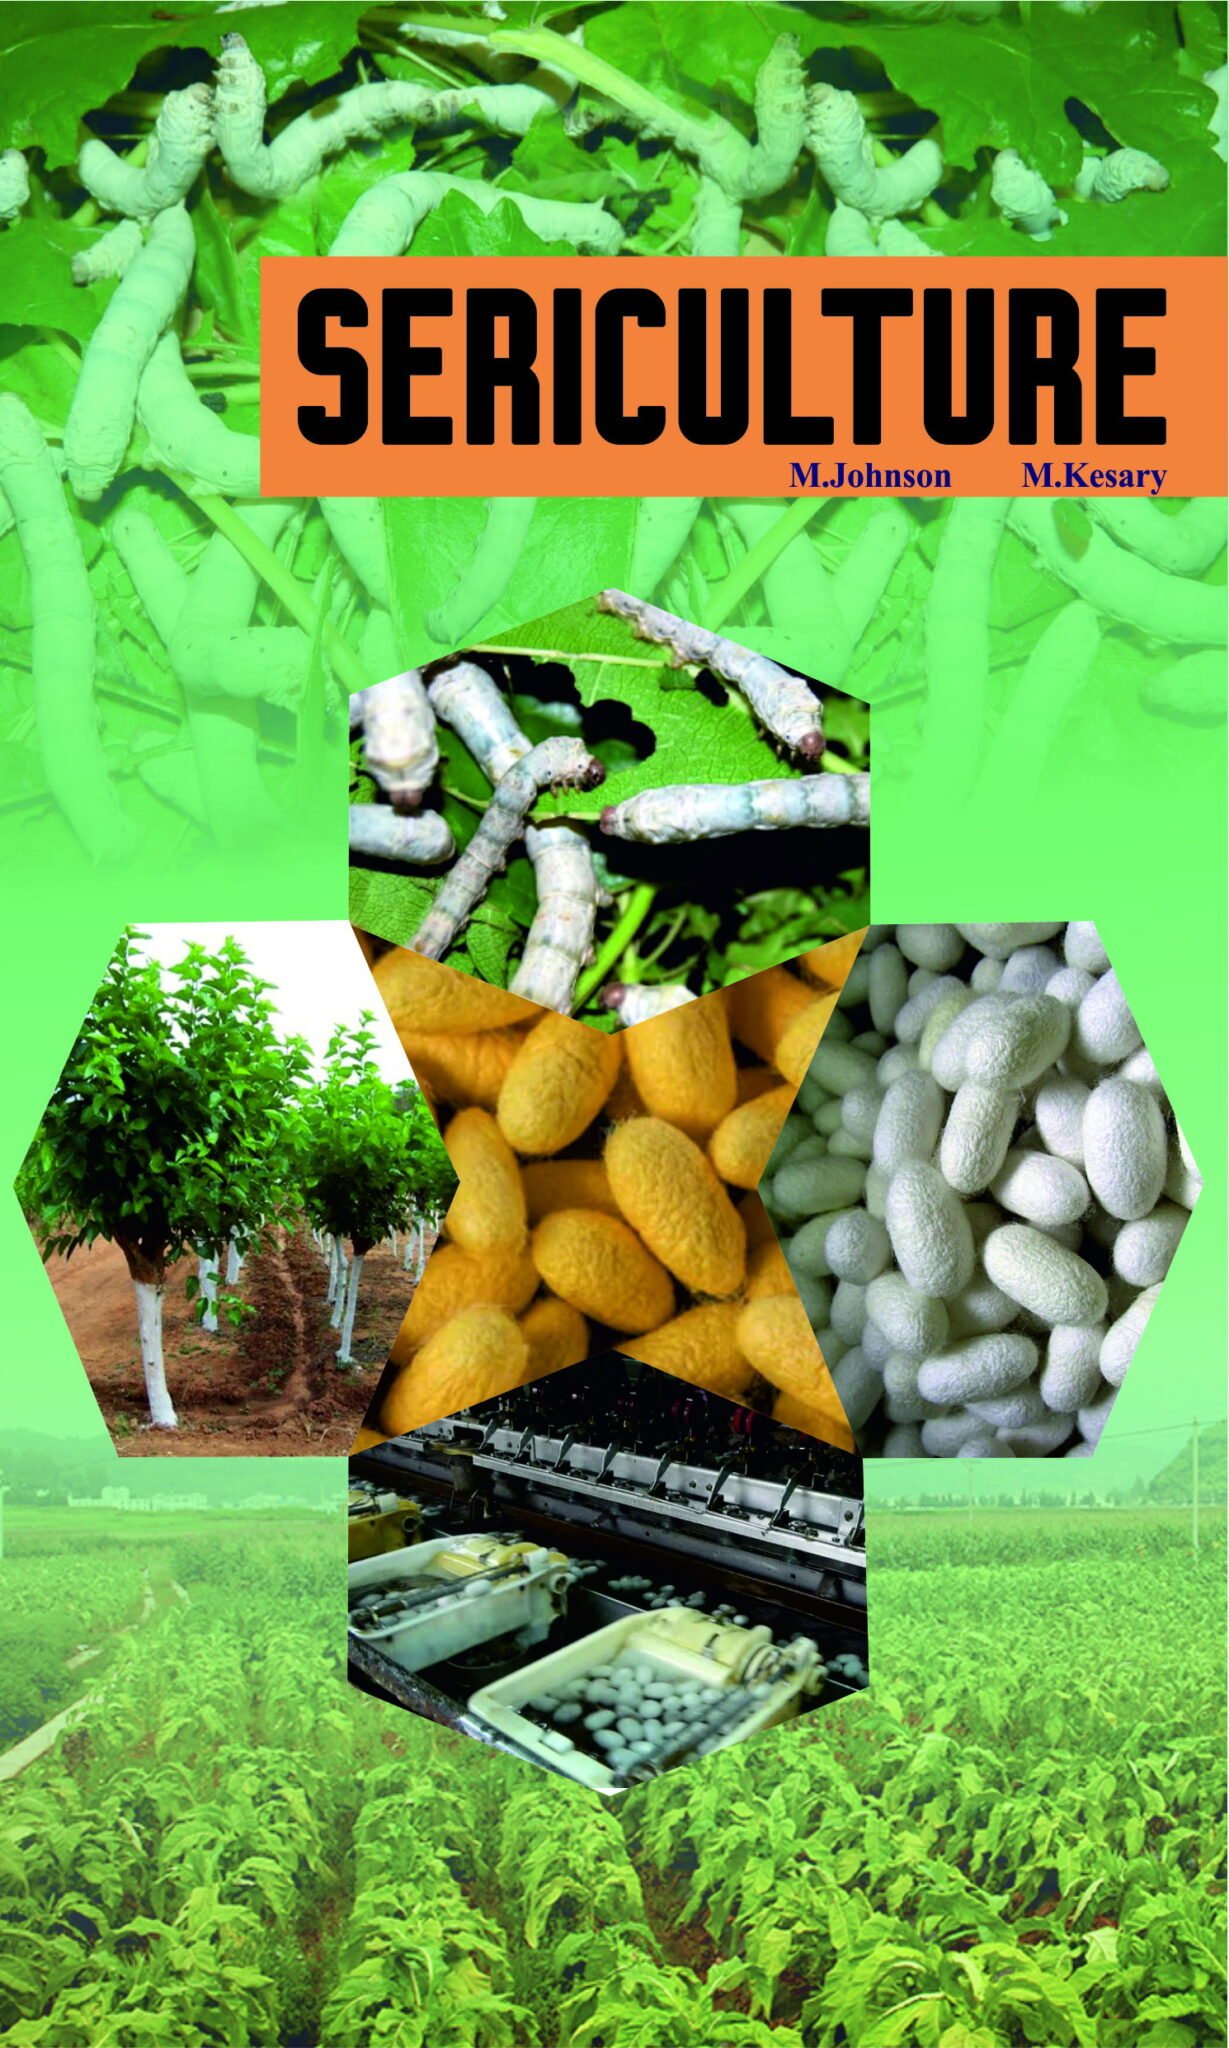 write an essay on sericulture